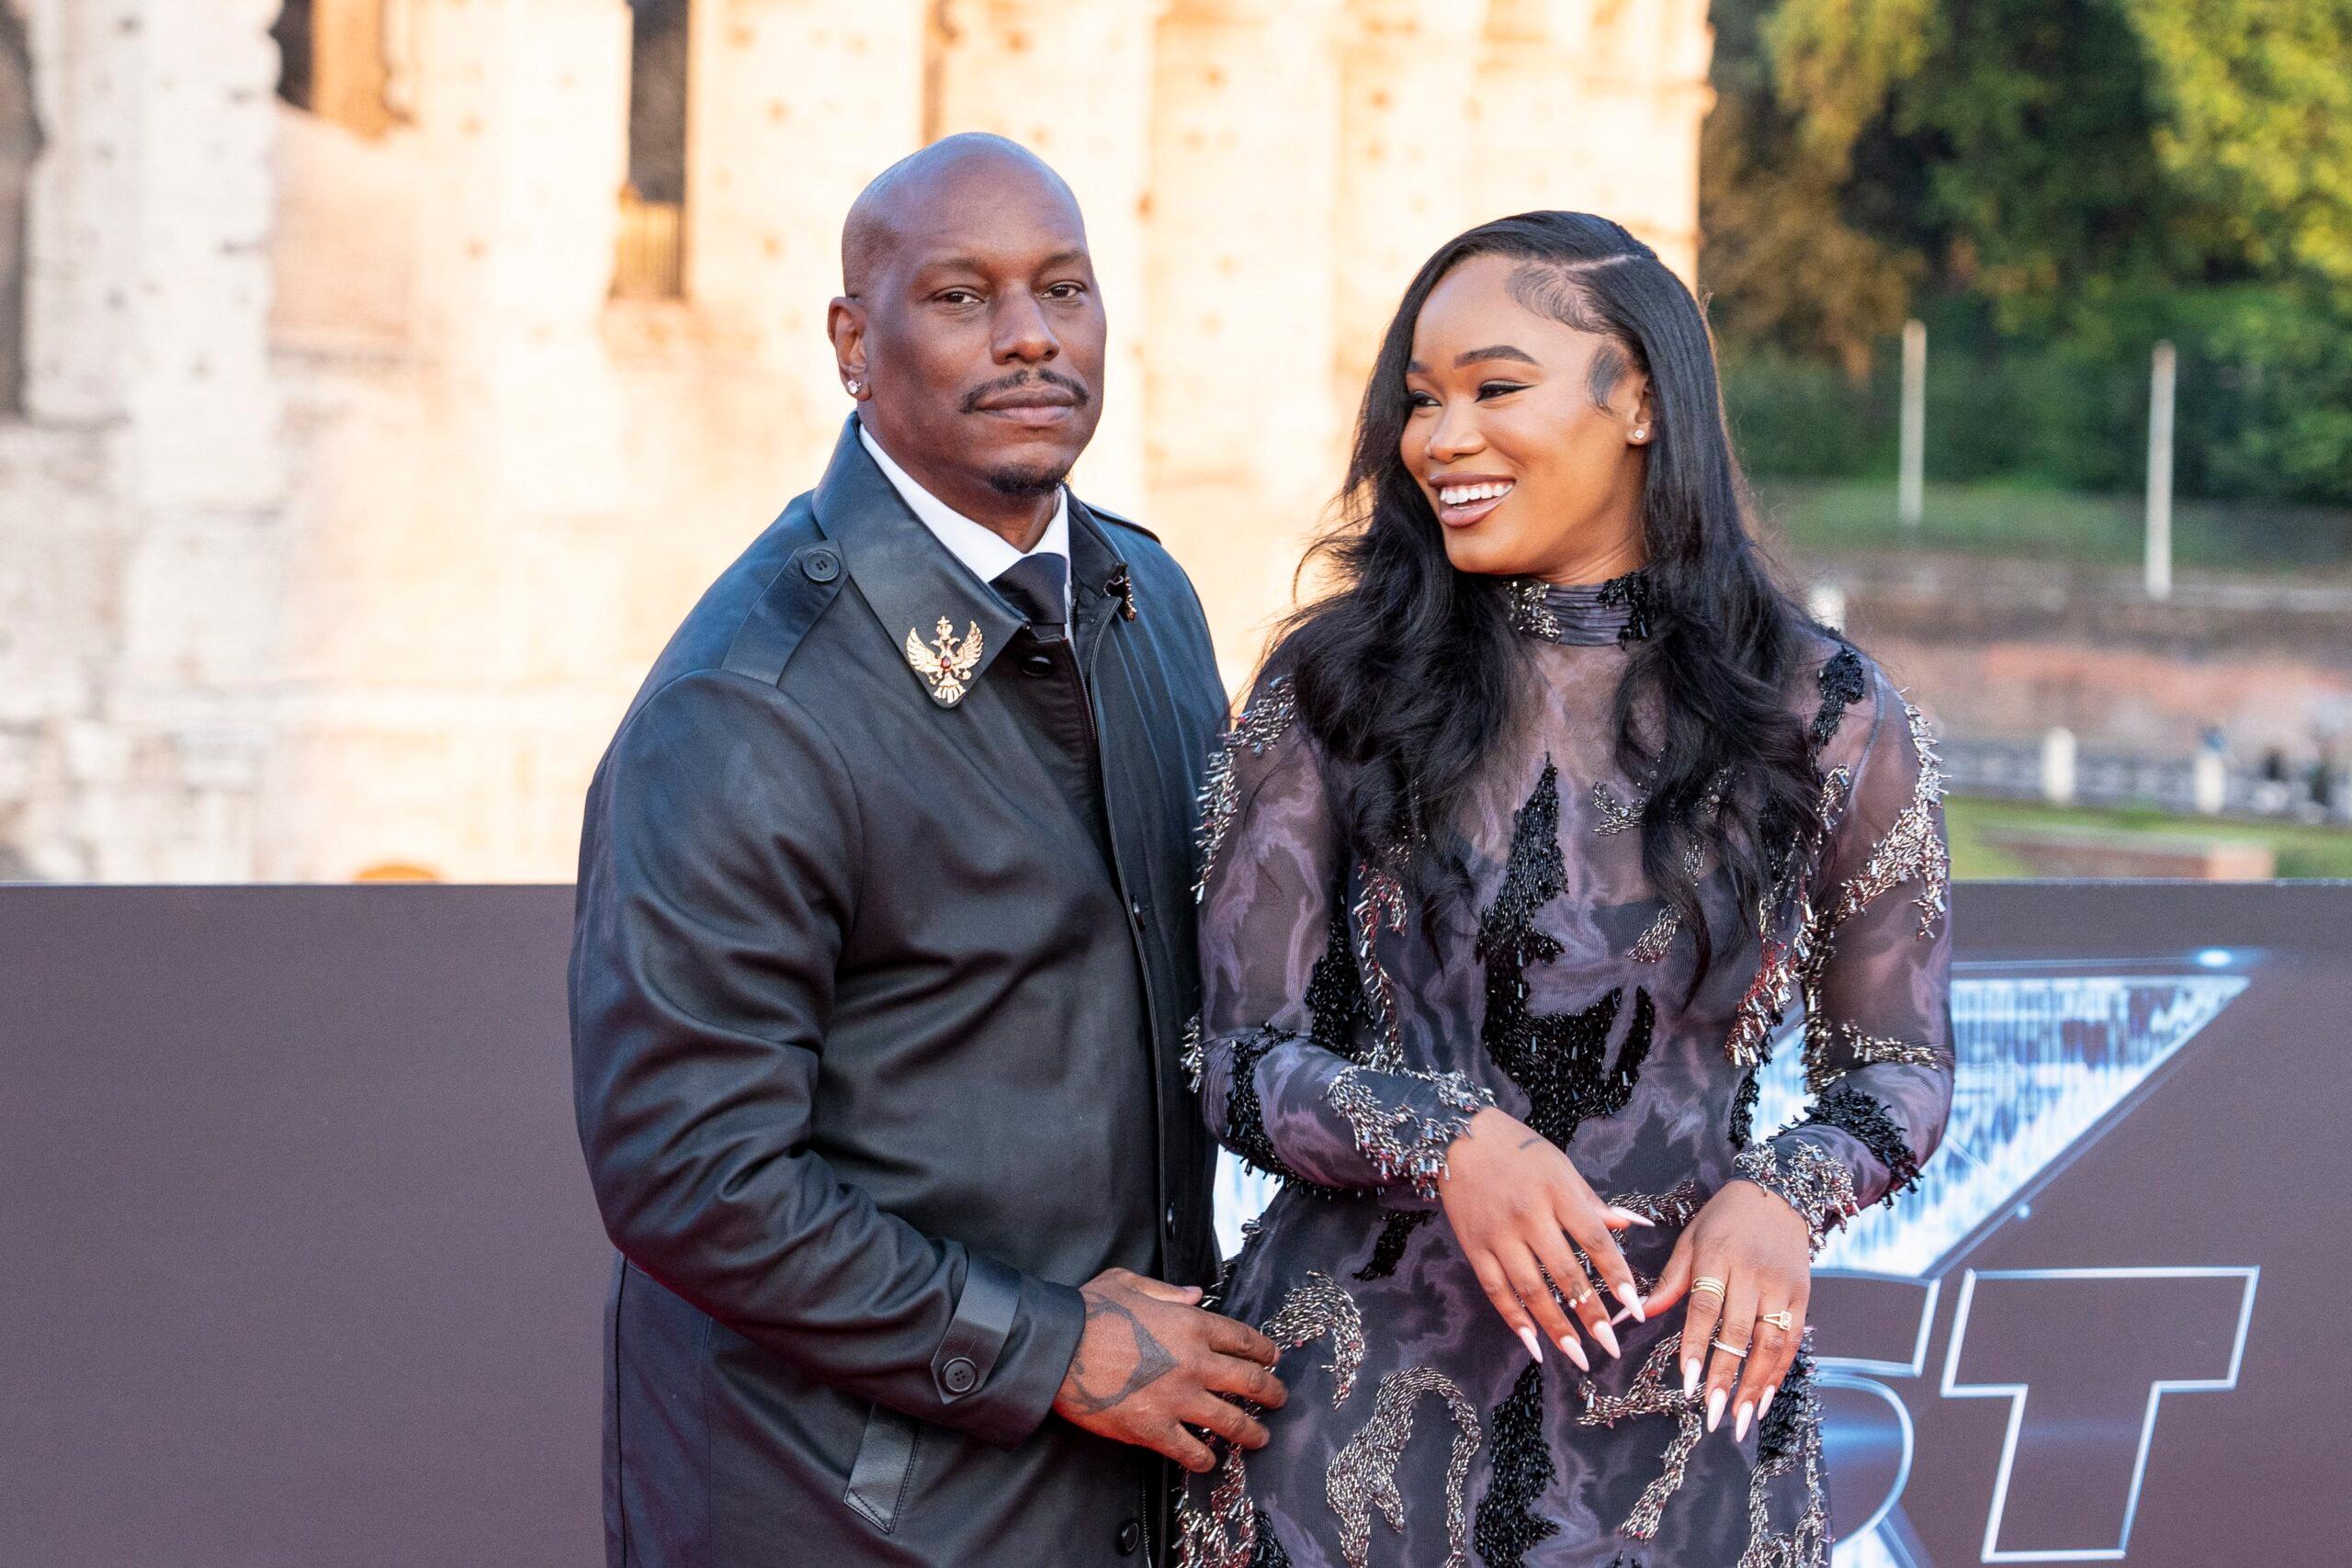 Tyrese Gibson and Zelie Timothy at "Fast X" World Premiere in Rome